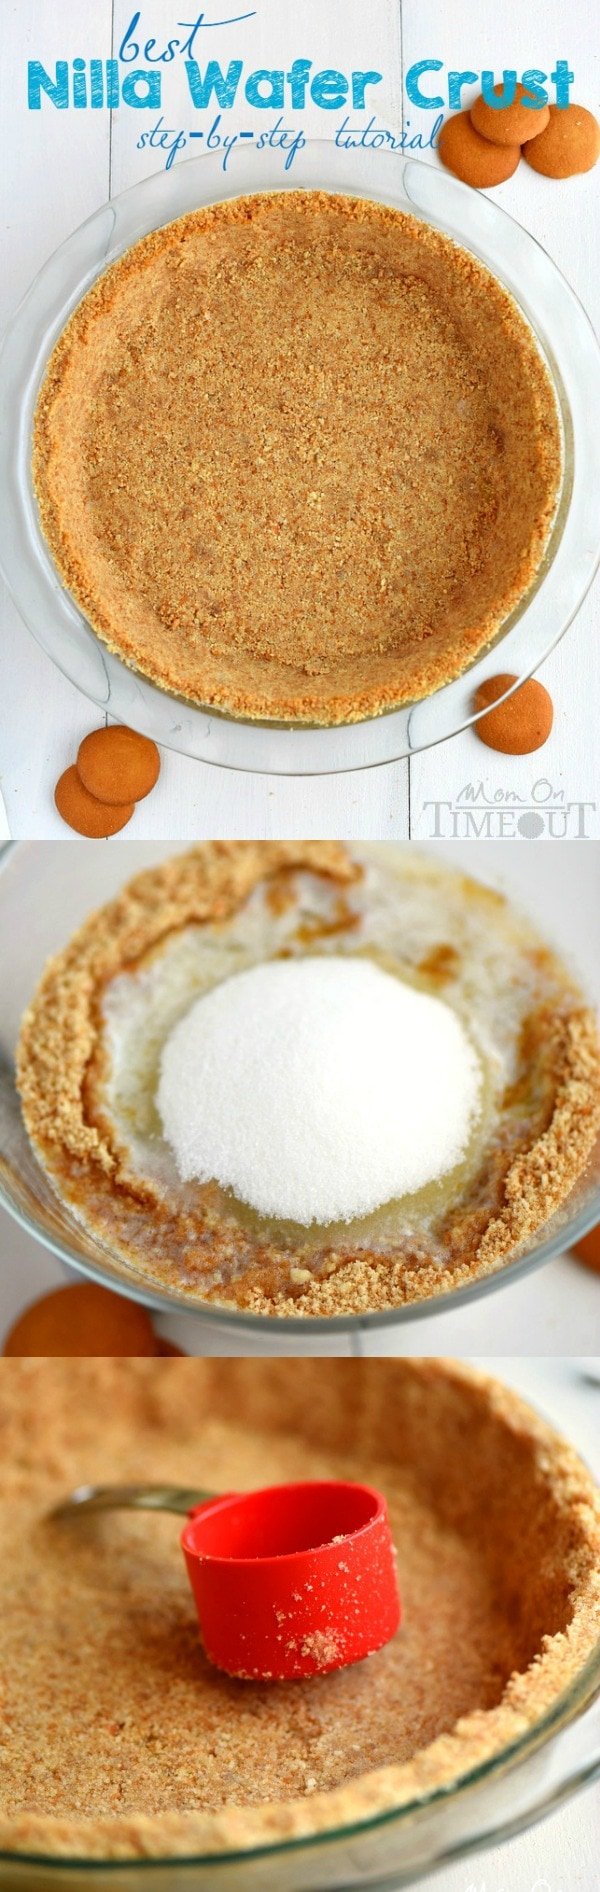 A step by step tutorial to your new favorite pie crust recipe! This is the BEST Nilla Wafer Pie Crust ever and so easy too! | MomOnTmeout.com